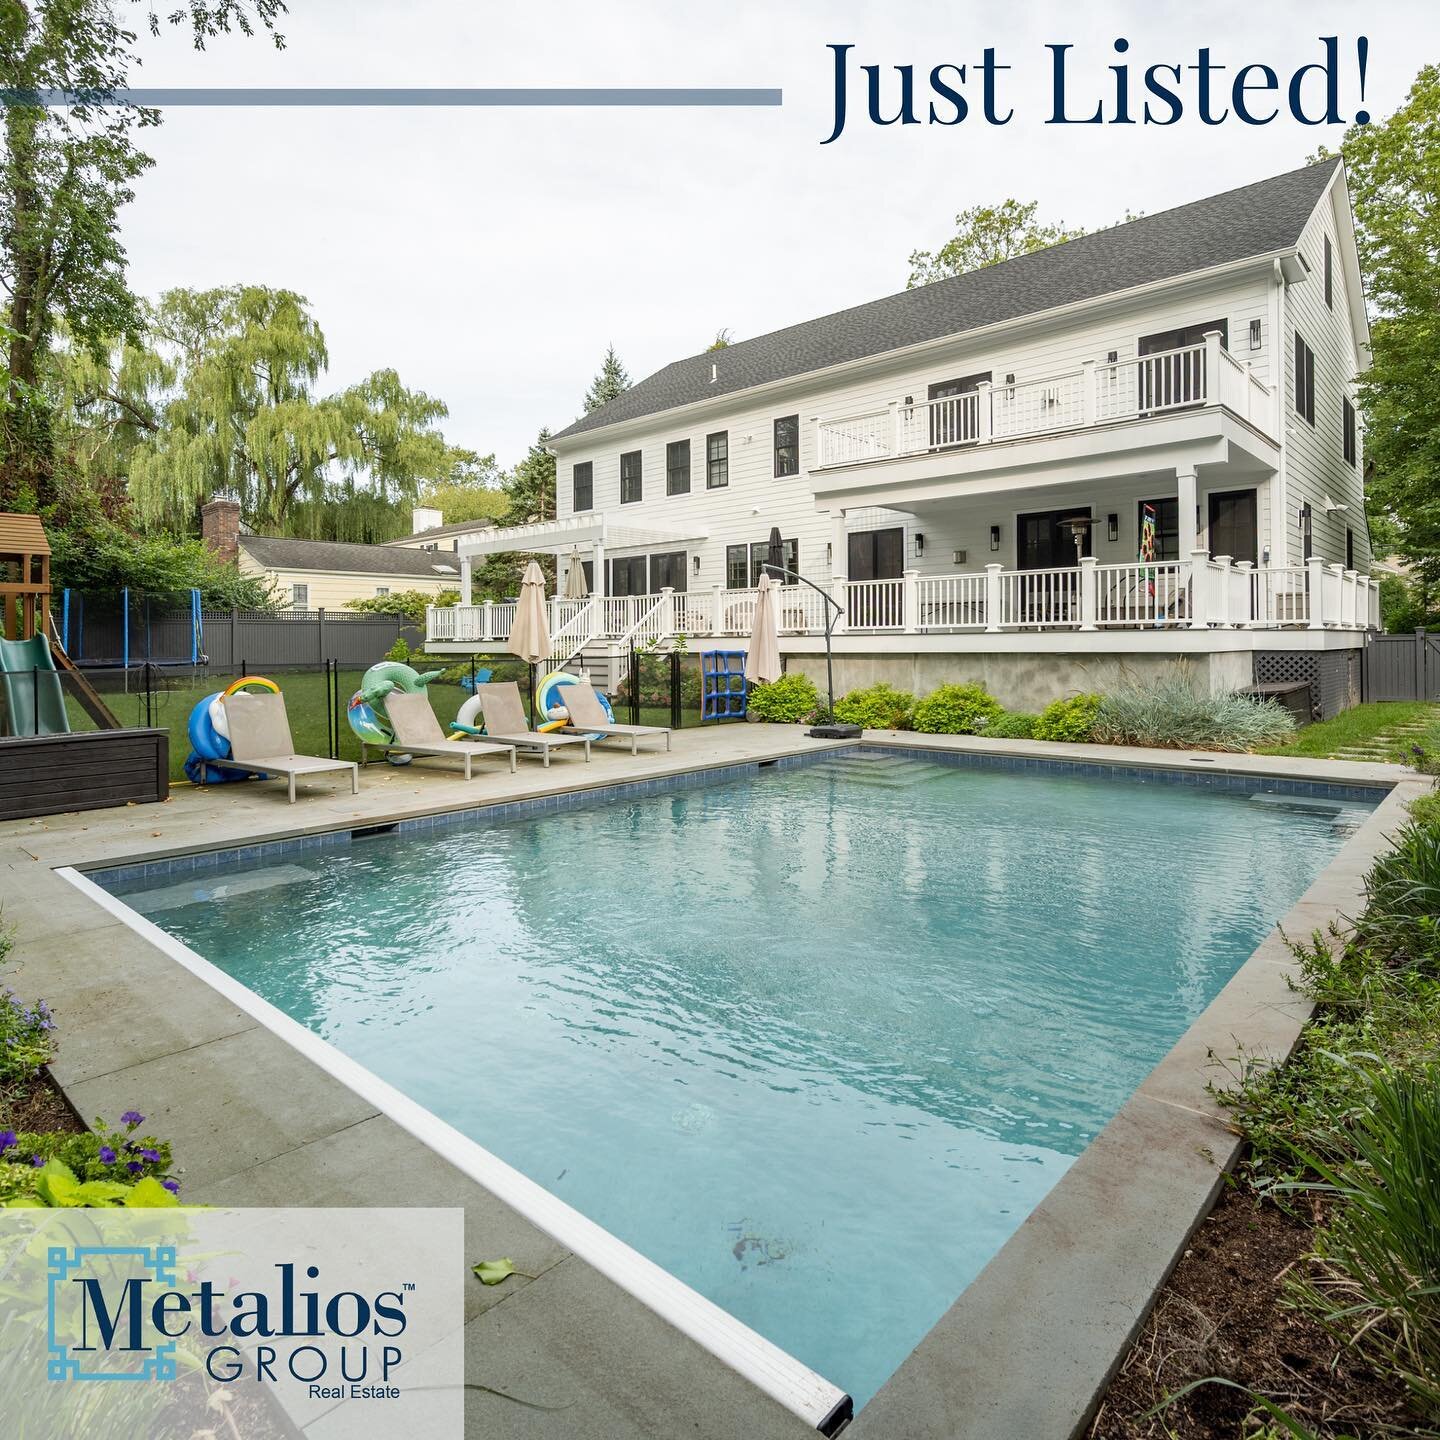 JUST LISTED! ✨ swipe to see this stunning new home for sale &mdash; 132 Lockwood Rd, in Riverside CT. 

This modern home is styled with a focus on symmetry ahead of its time - enter into a striking foyer with a glass rail staircase and white oak floo